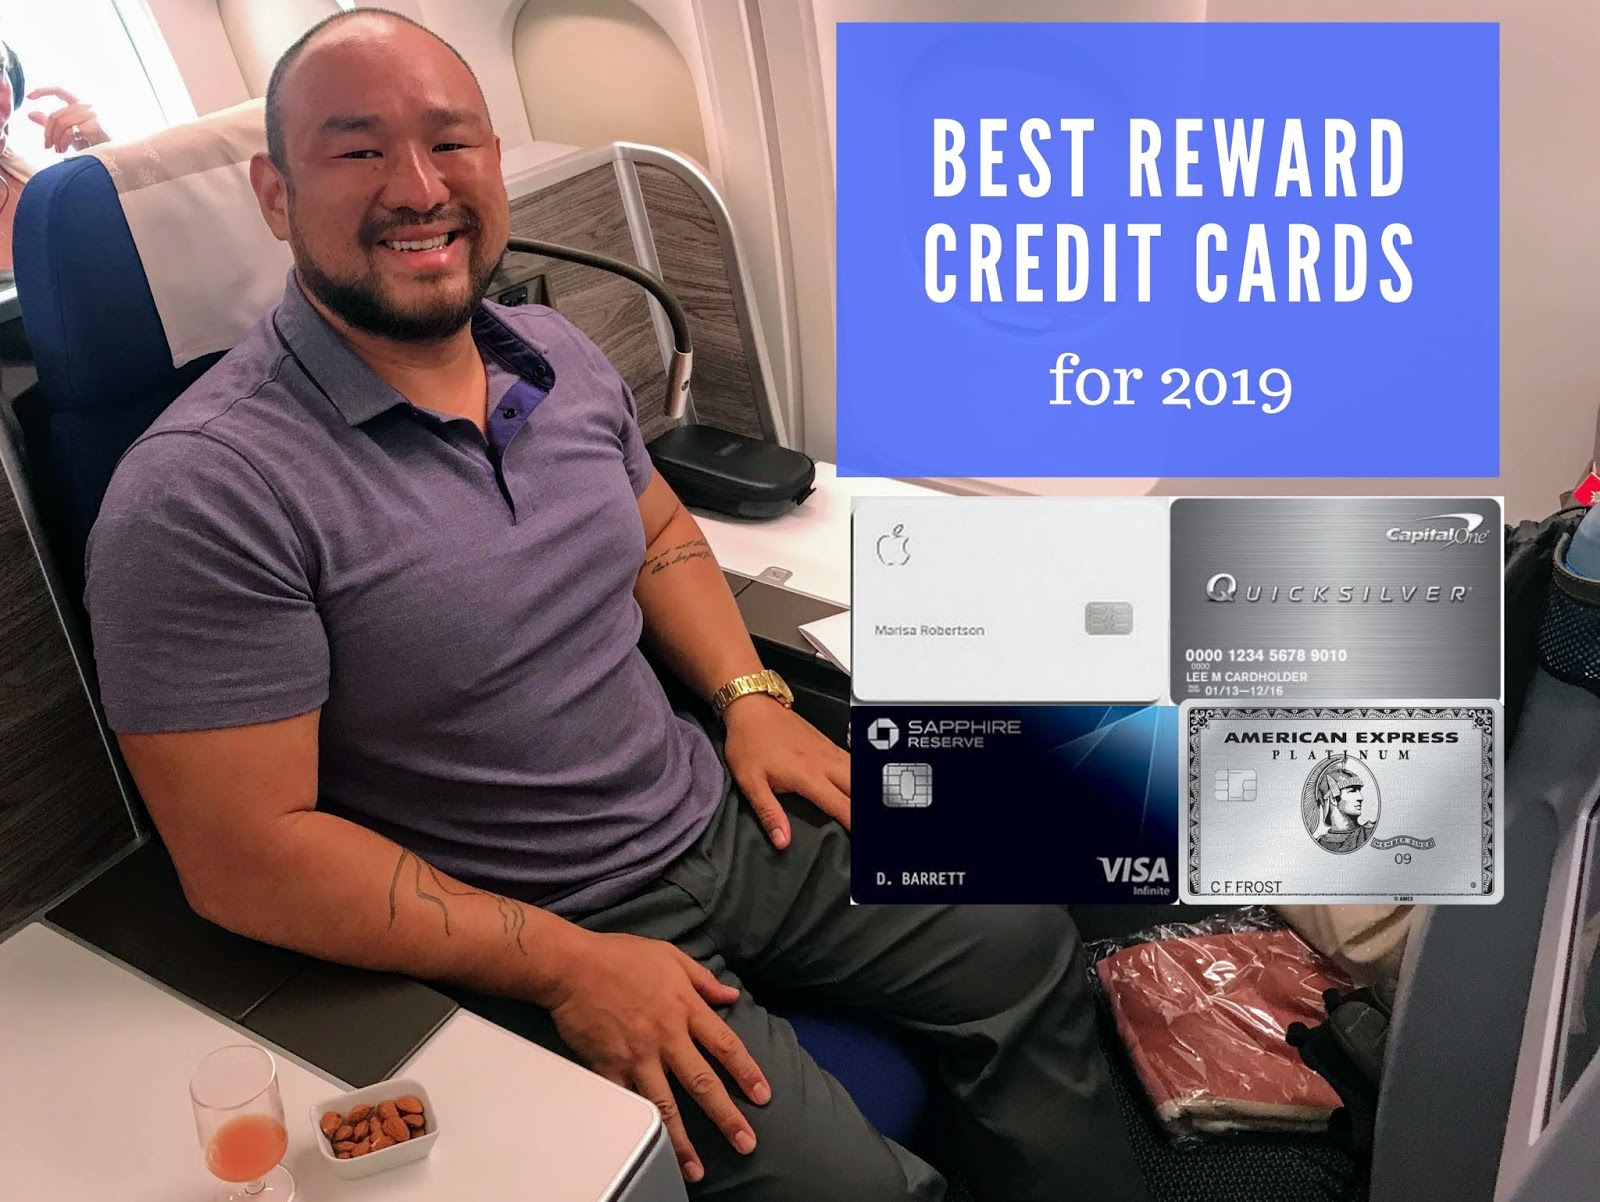 Best Credit Cards For 2019 Travel Rewards Points Apple Card Vs Chase Sapphire Reserve Johnnyfd Com Follow The Journey Of A Location Independent Entrepreneur